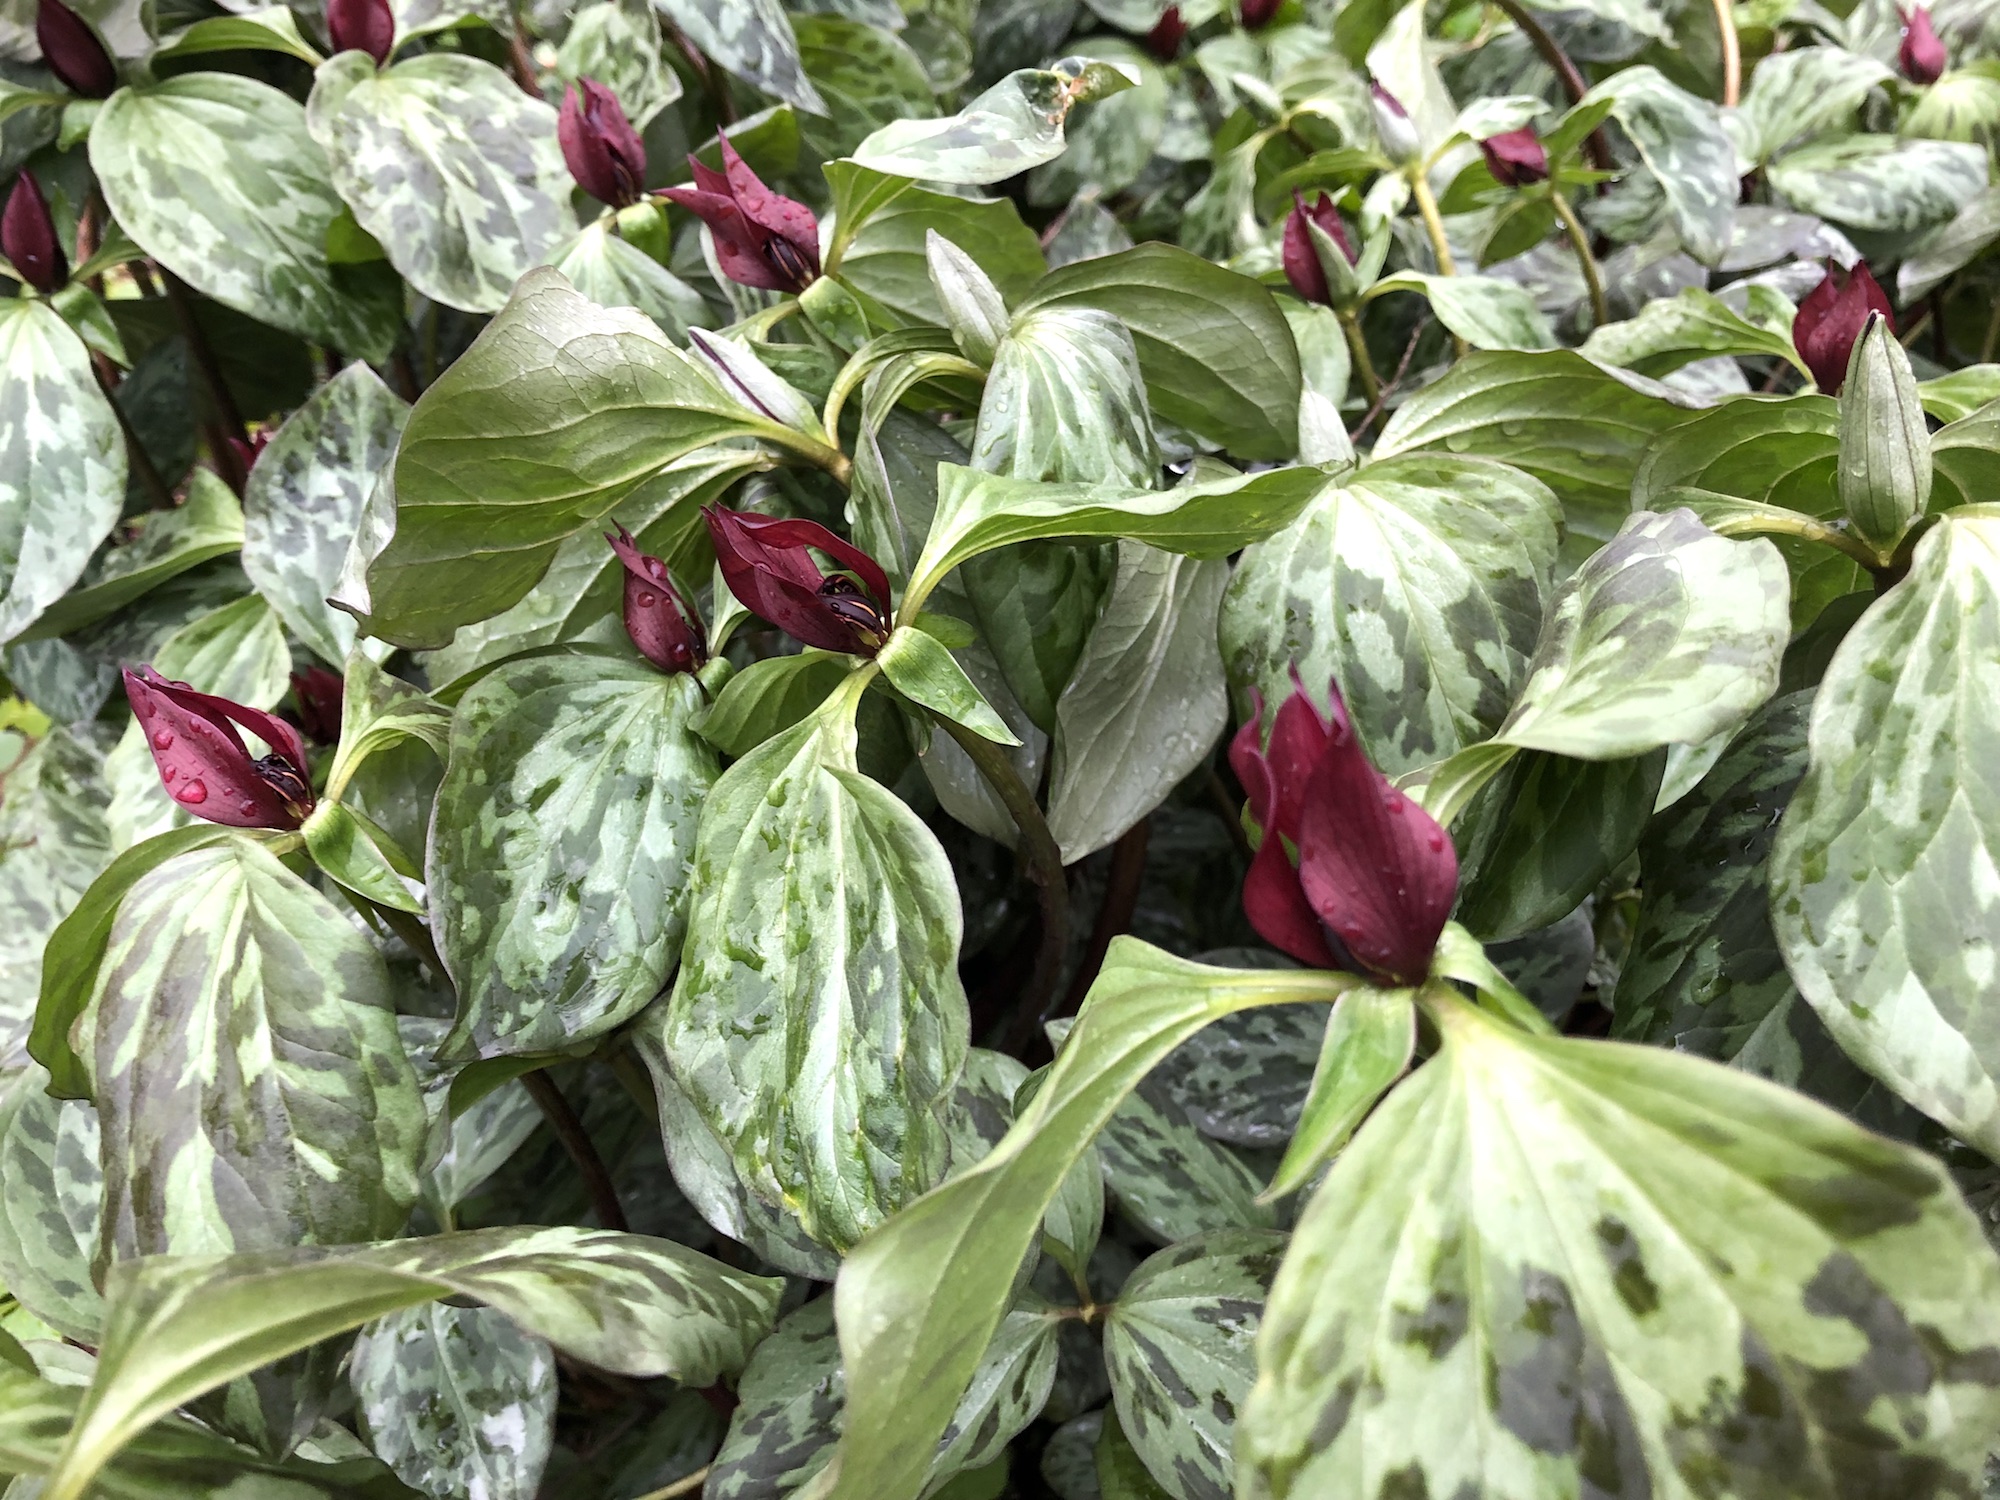 Trillium off of bike path between Marion Dunn and Duck Pond on April 30, 2019.